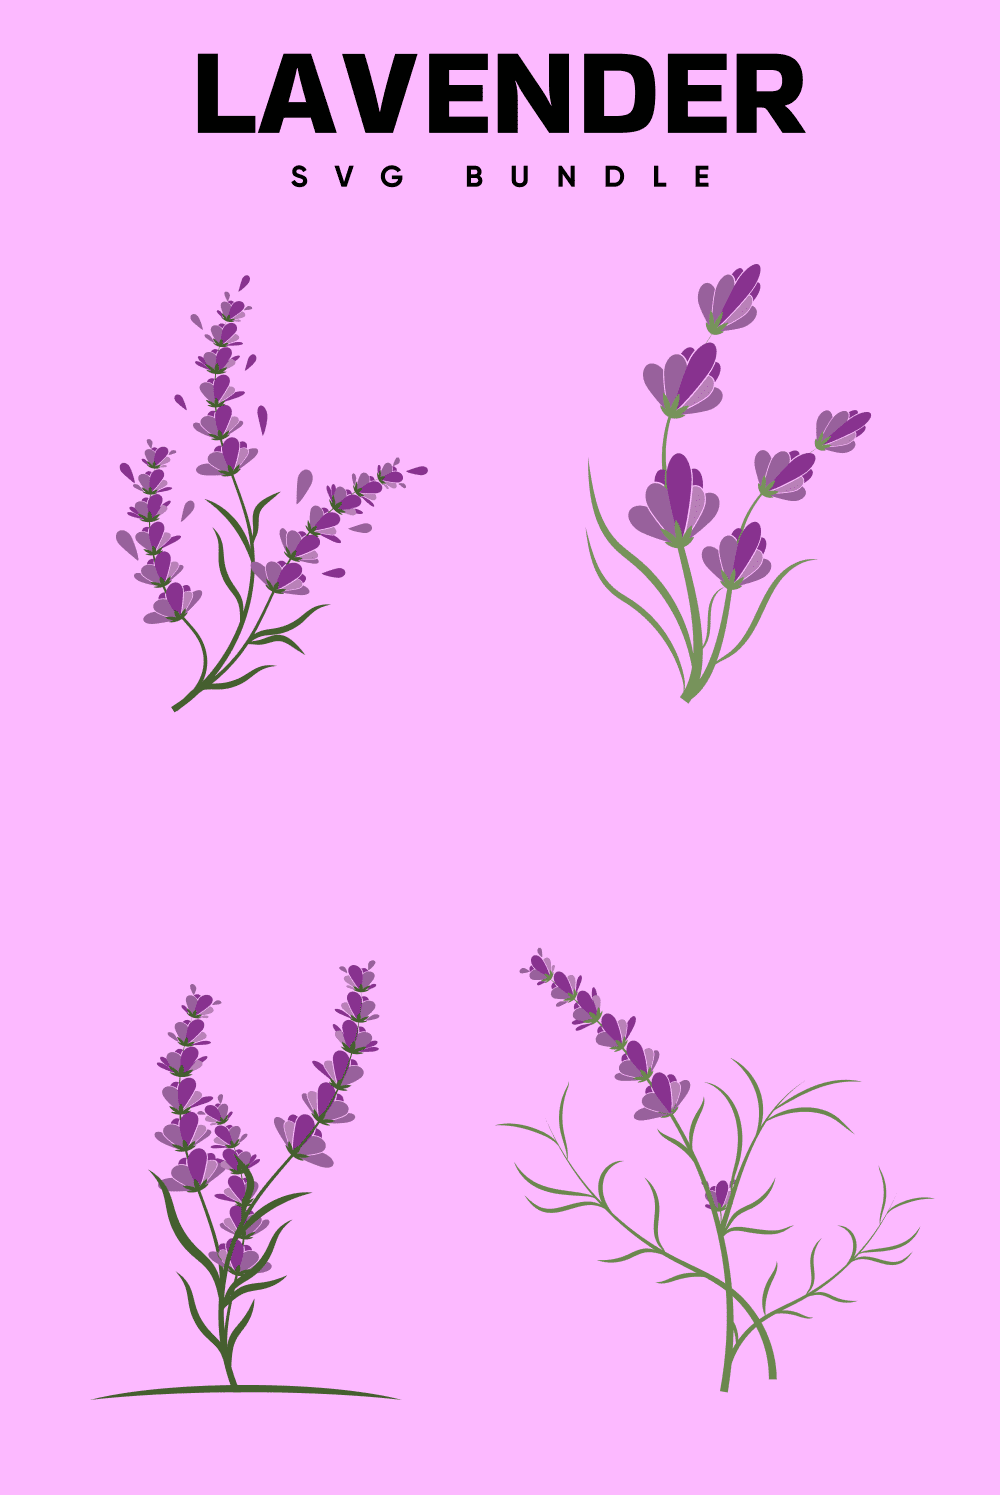 A gentle lavender plant is drawn on a pink background.